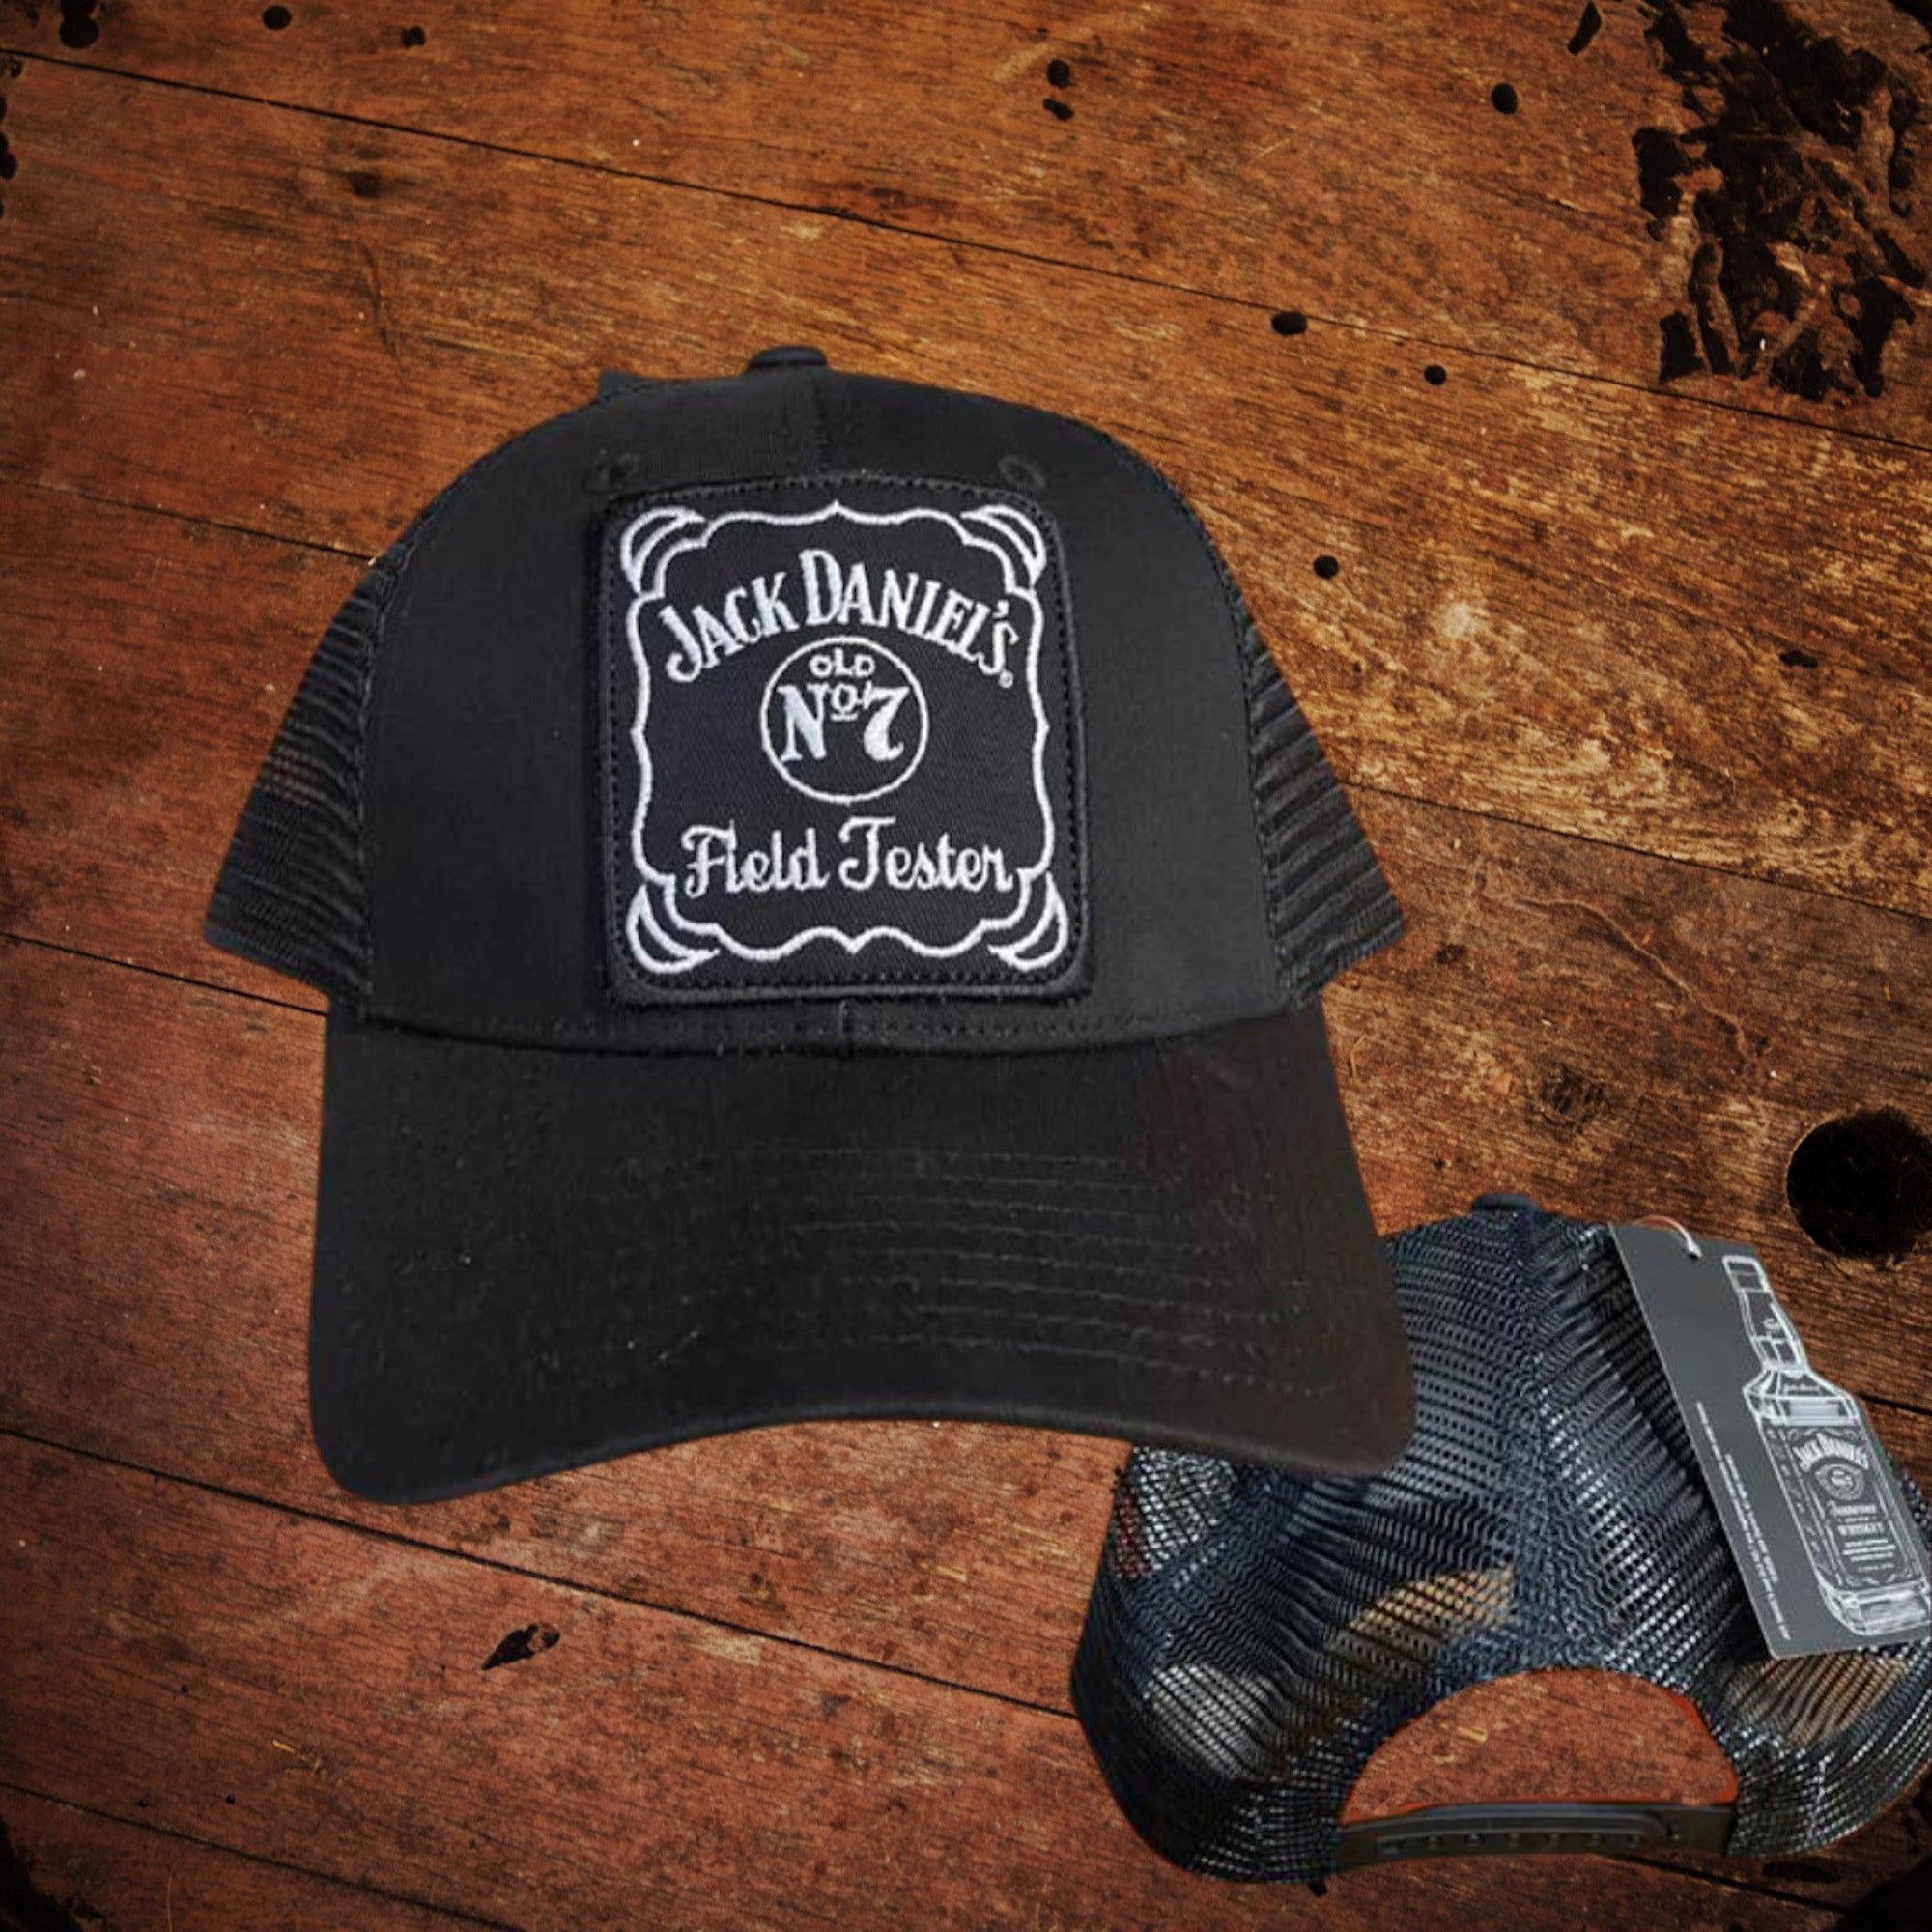 Jack Daniel’s New Field Tester Hat - The Whiskey Cave